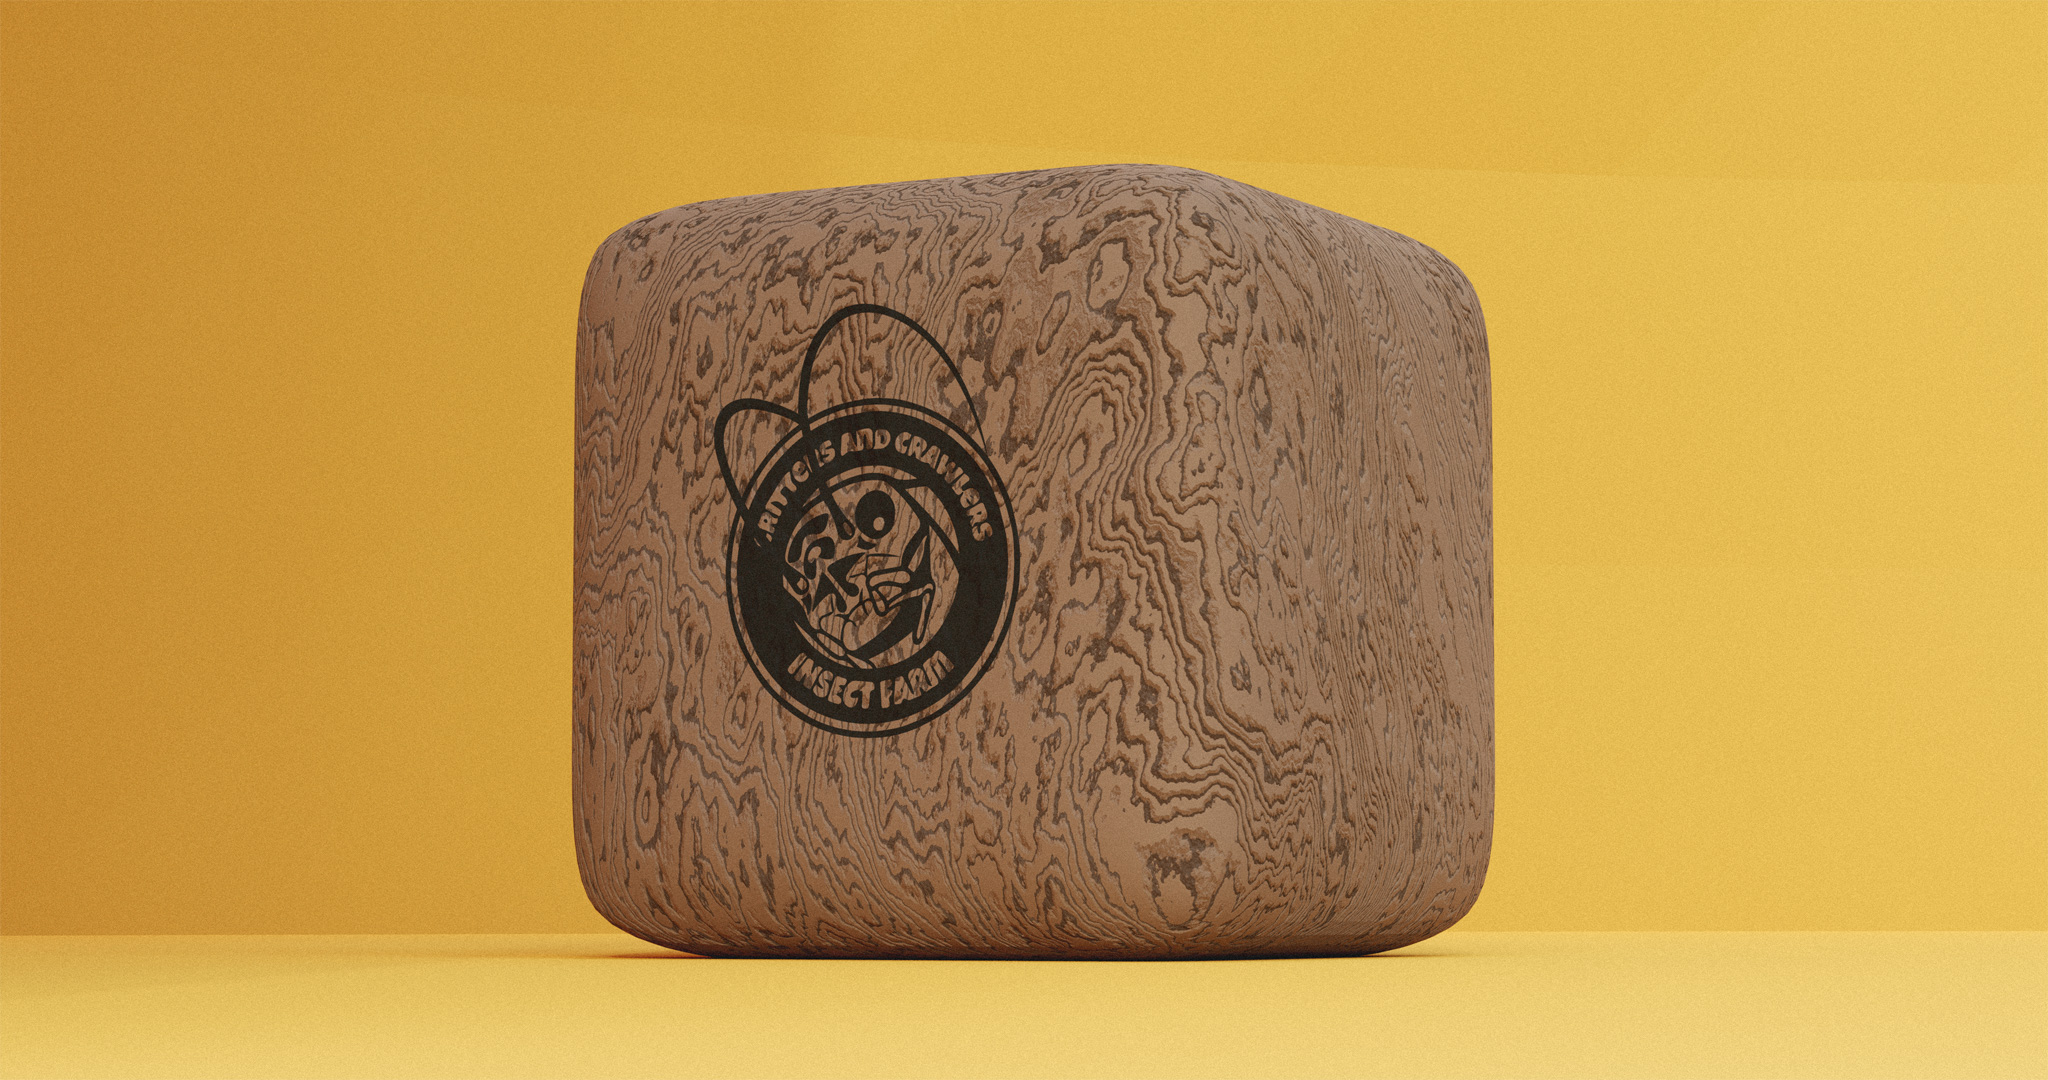 3D render of a wooden cube, featuring an engraving of the Critters and Crawlers monogram logo.